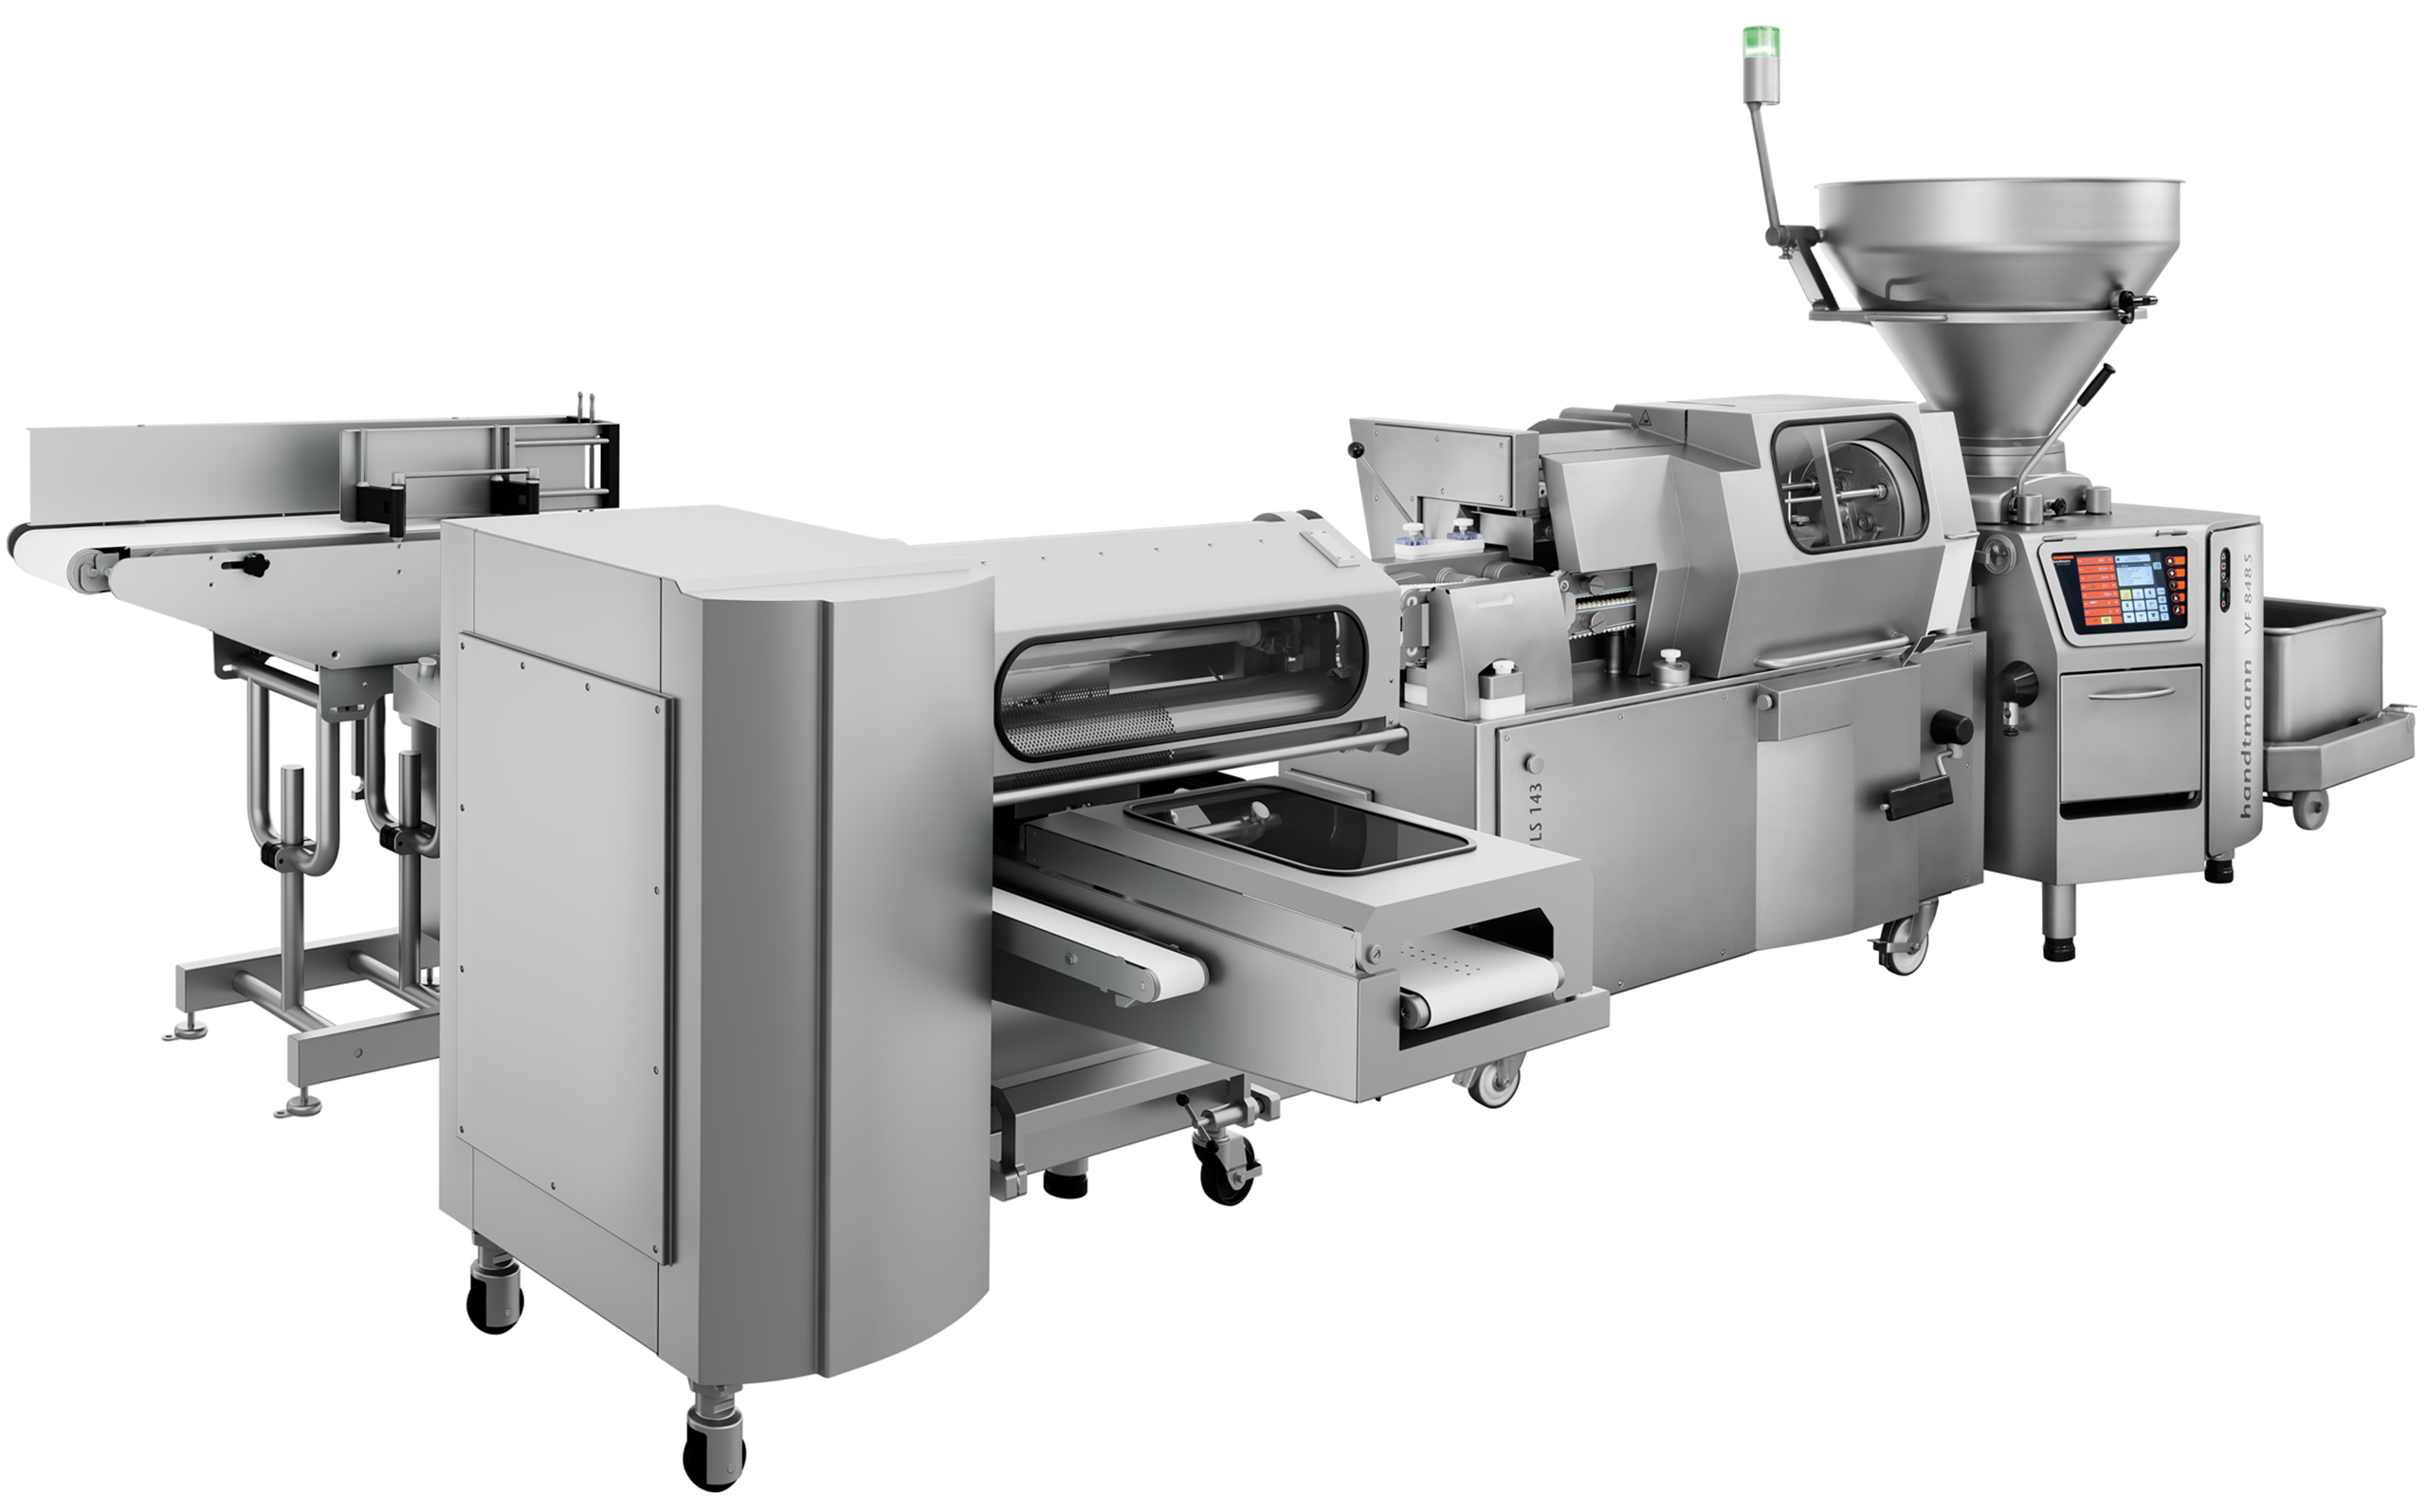 GS 300 collating system